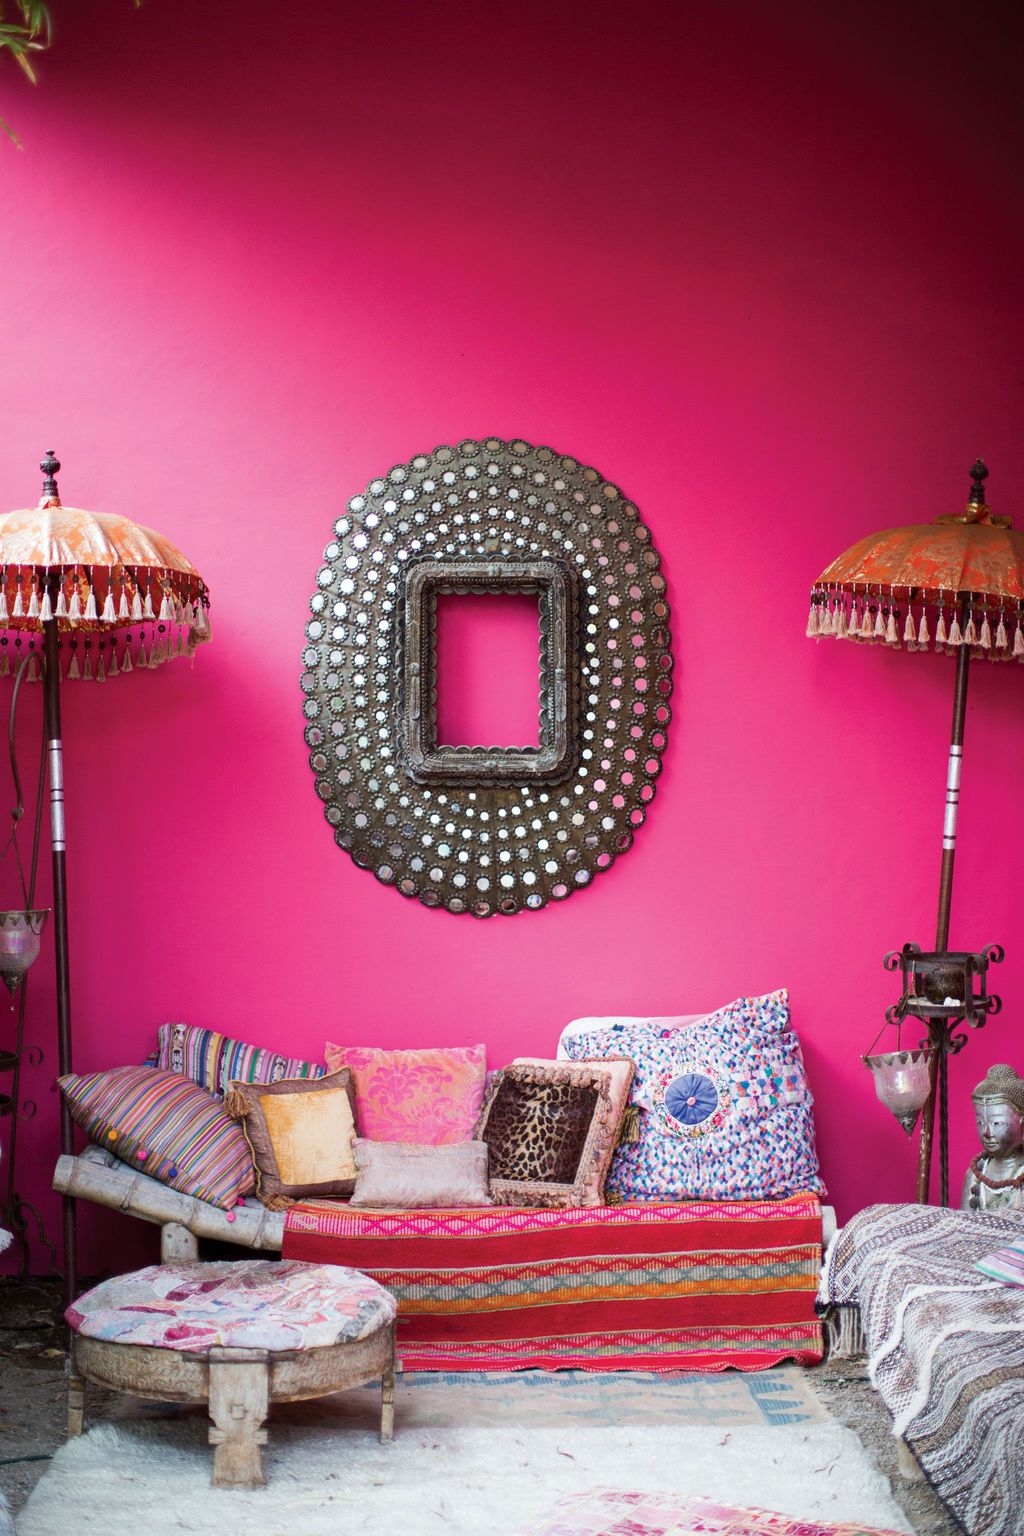 Best Ideas To Bring A Pop Of Bright Color Into Your Interior Design 49